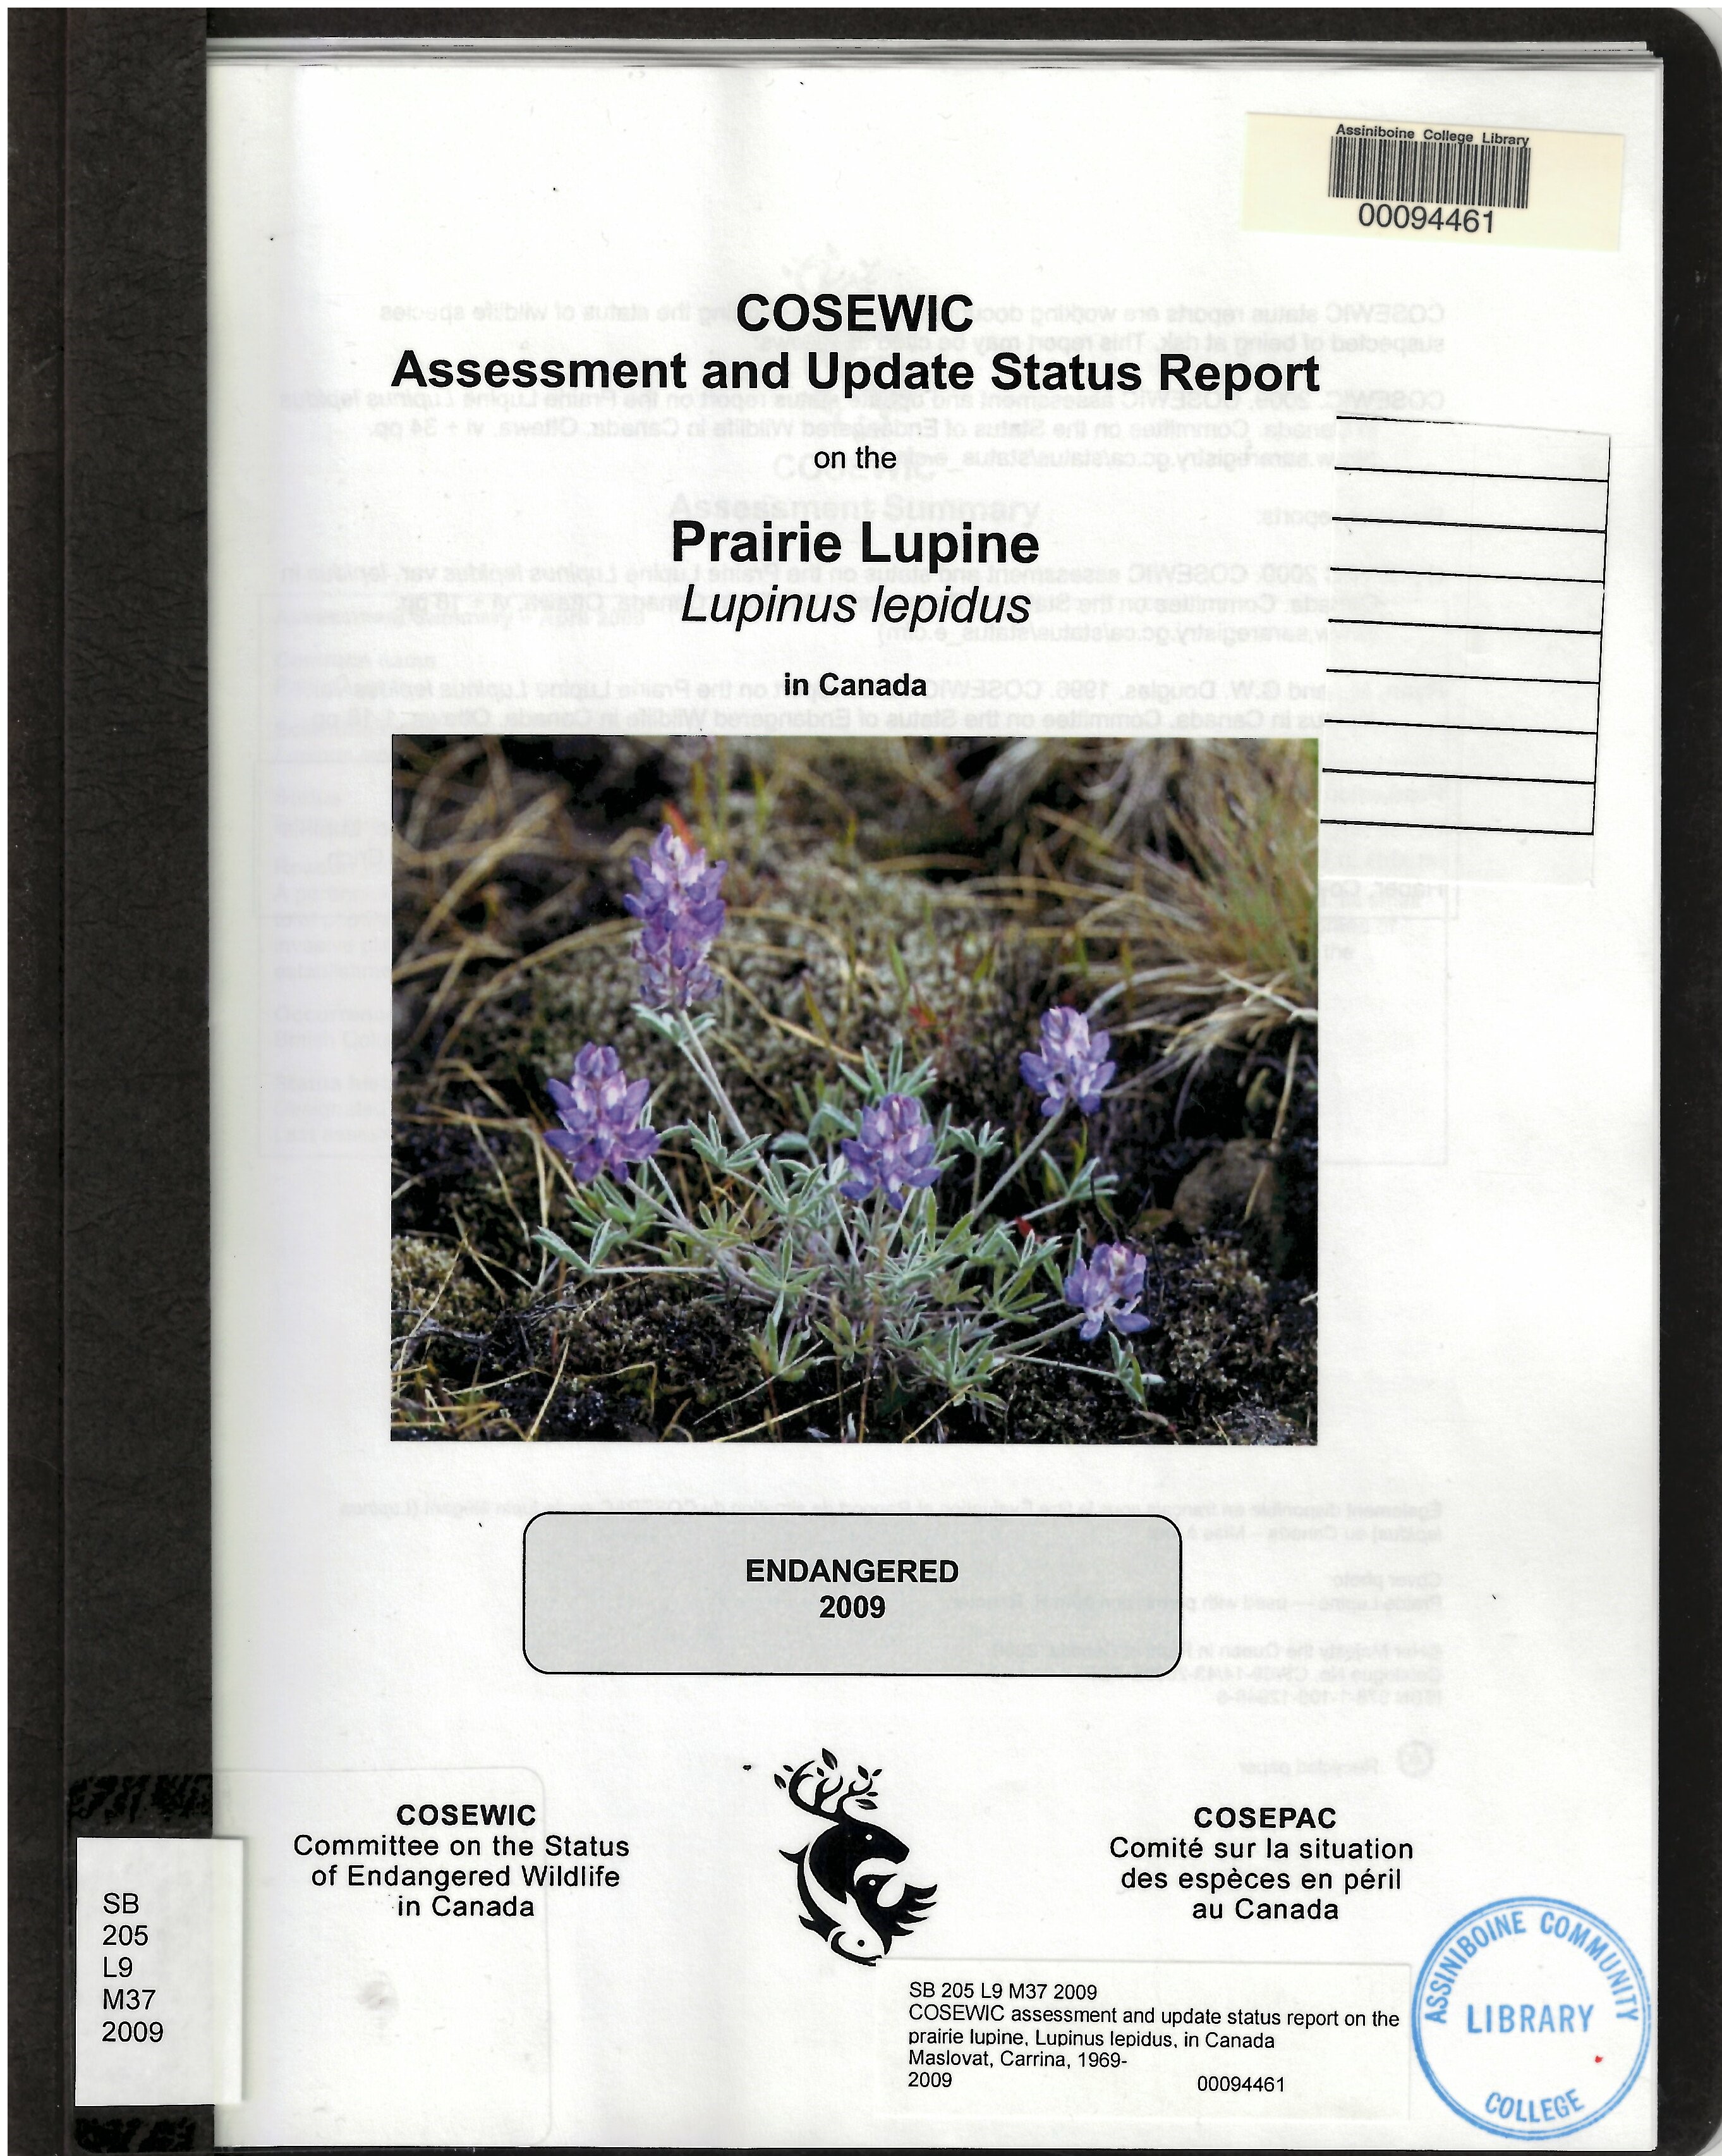 COSEWIC assessment and update status report on the prairie lupine, Lupinus lepidus, in Canada